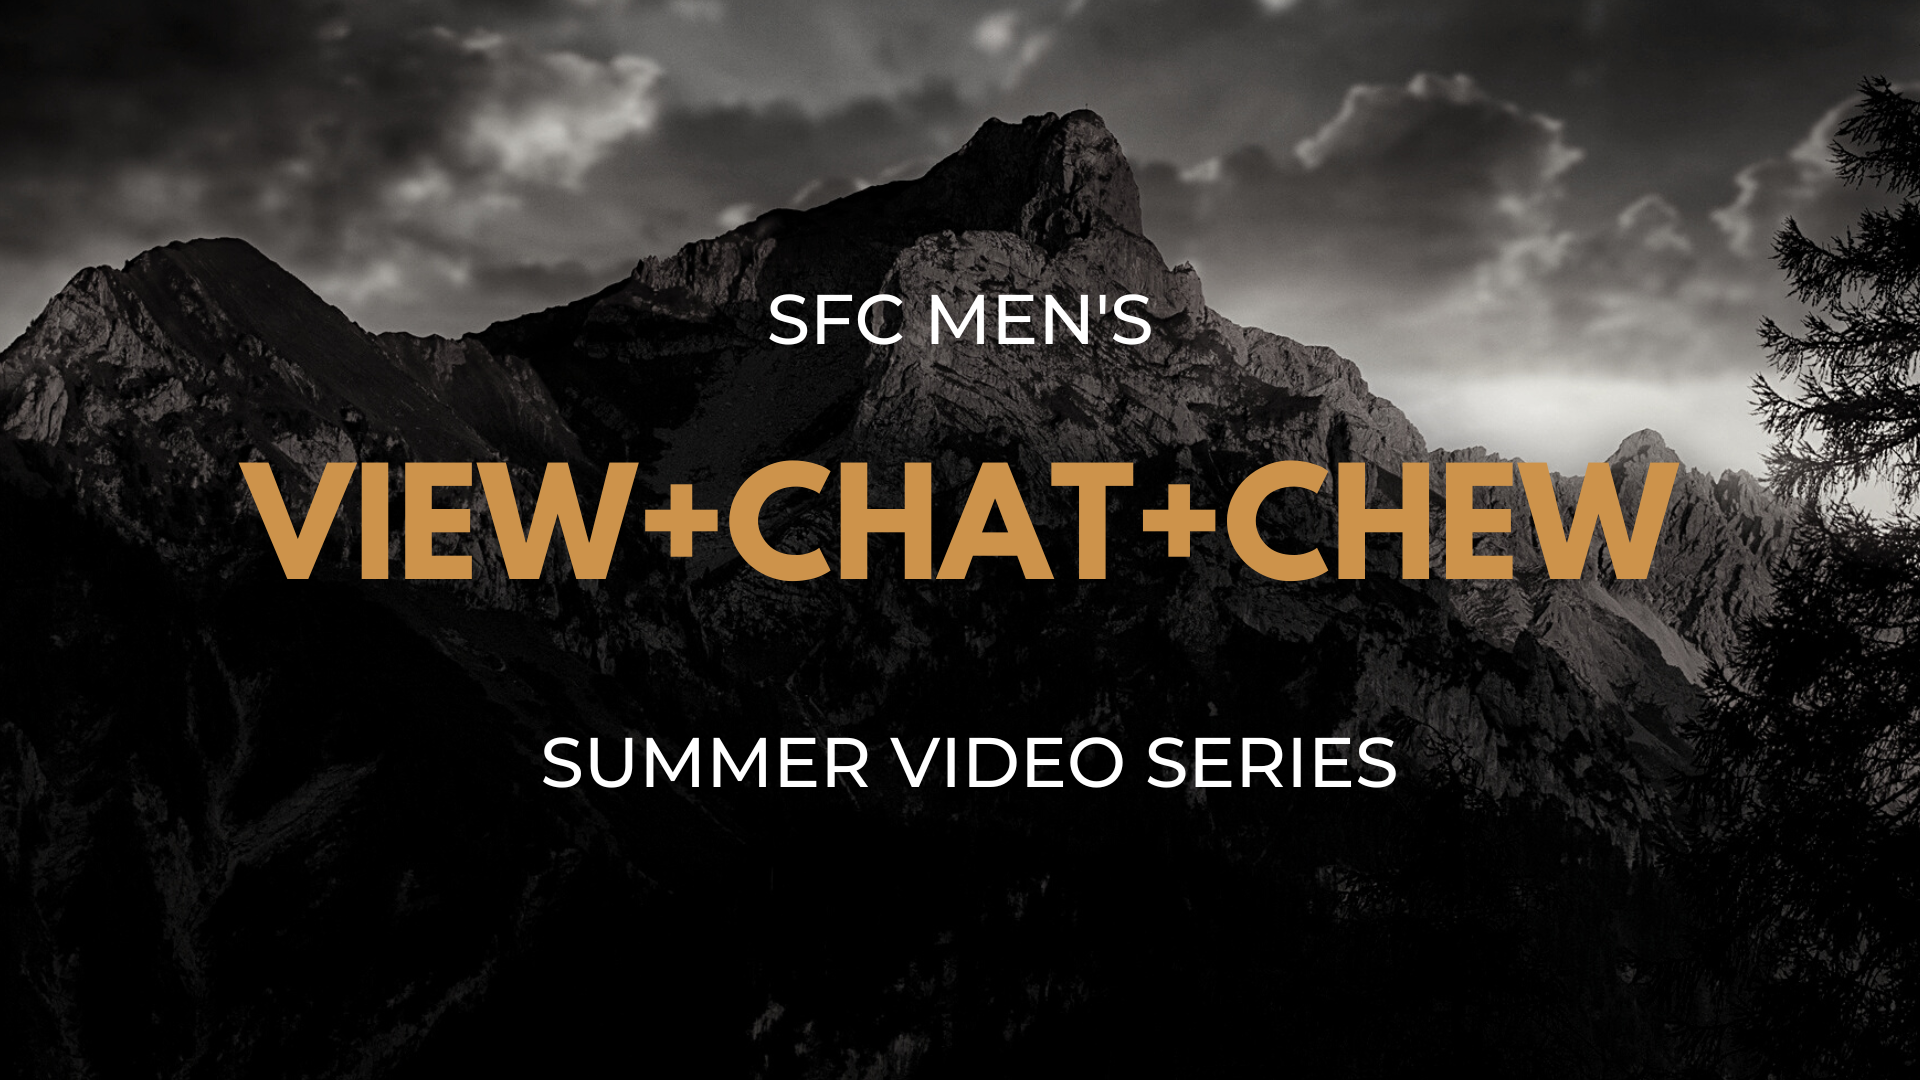 Men's View, Chat, and Chew (1) image